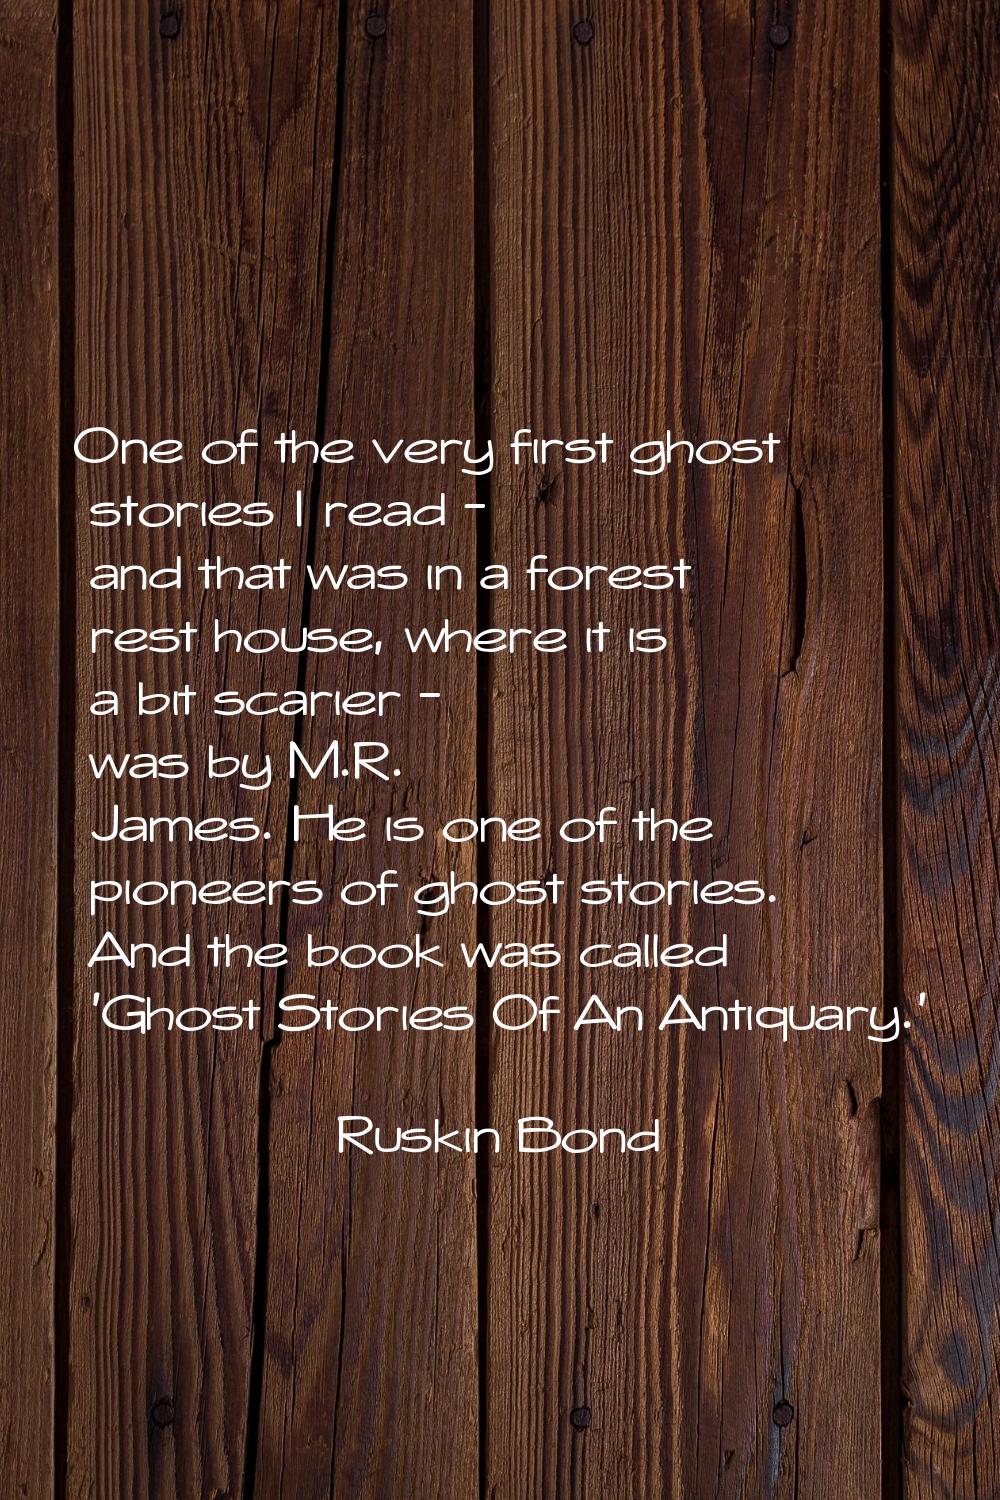 One of the very first ghost stories I read - and that was in a forest rest house, where it is a bit